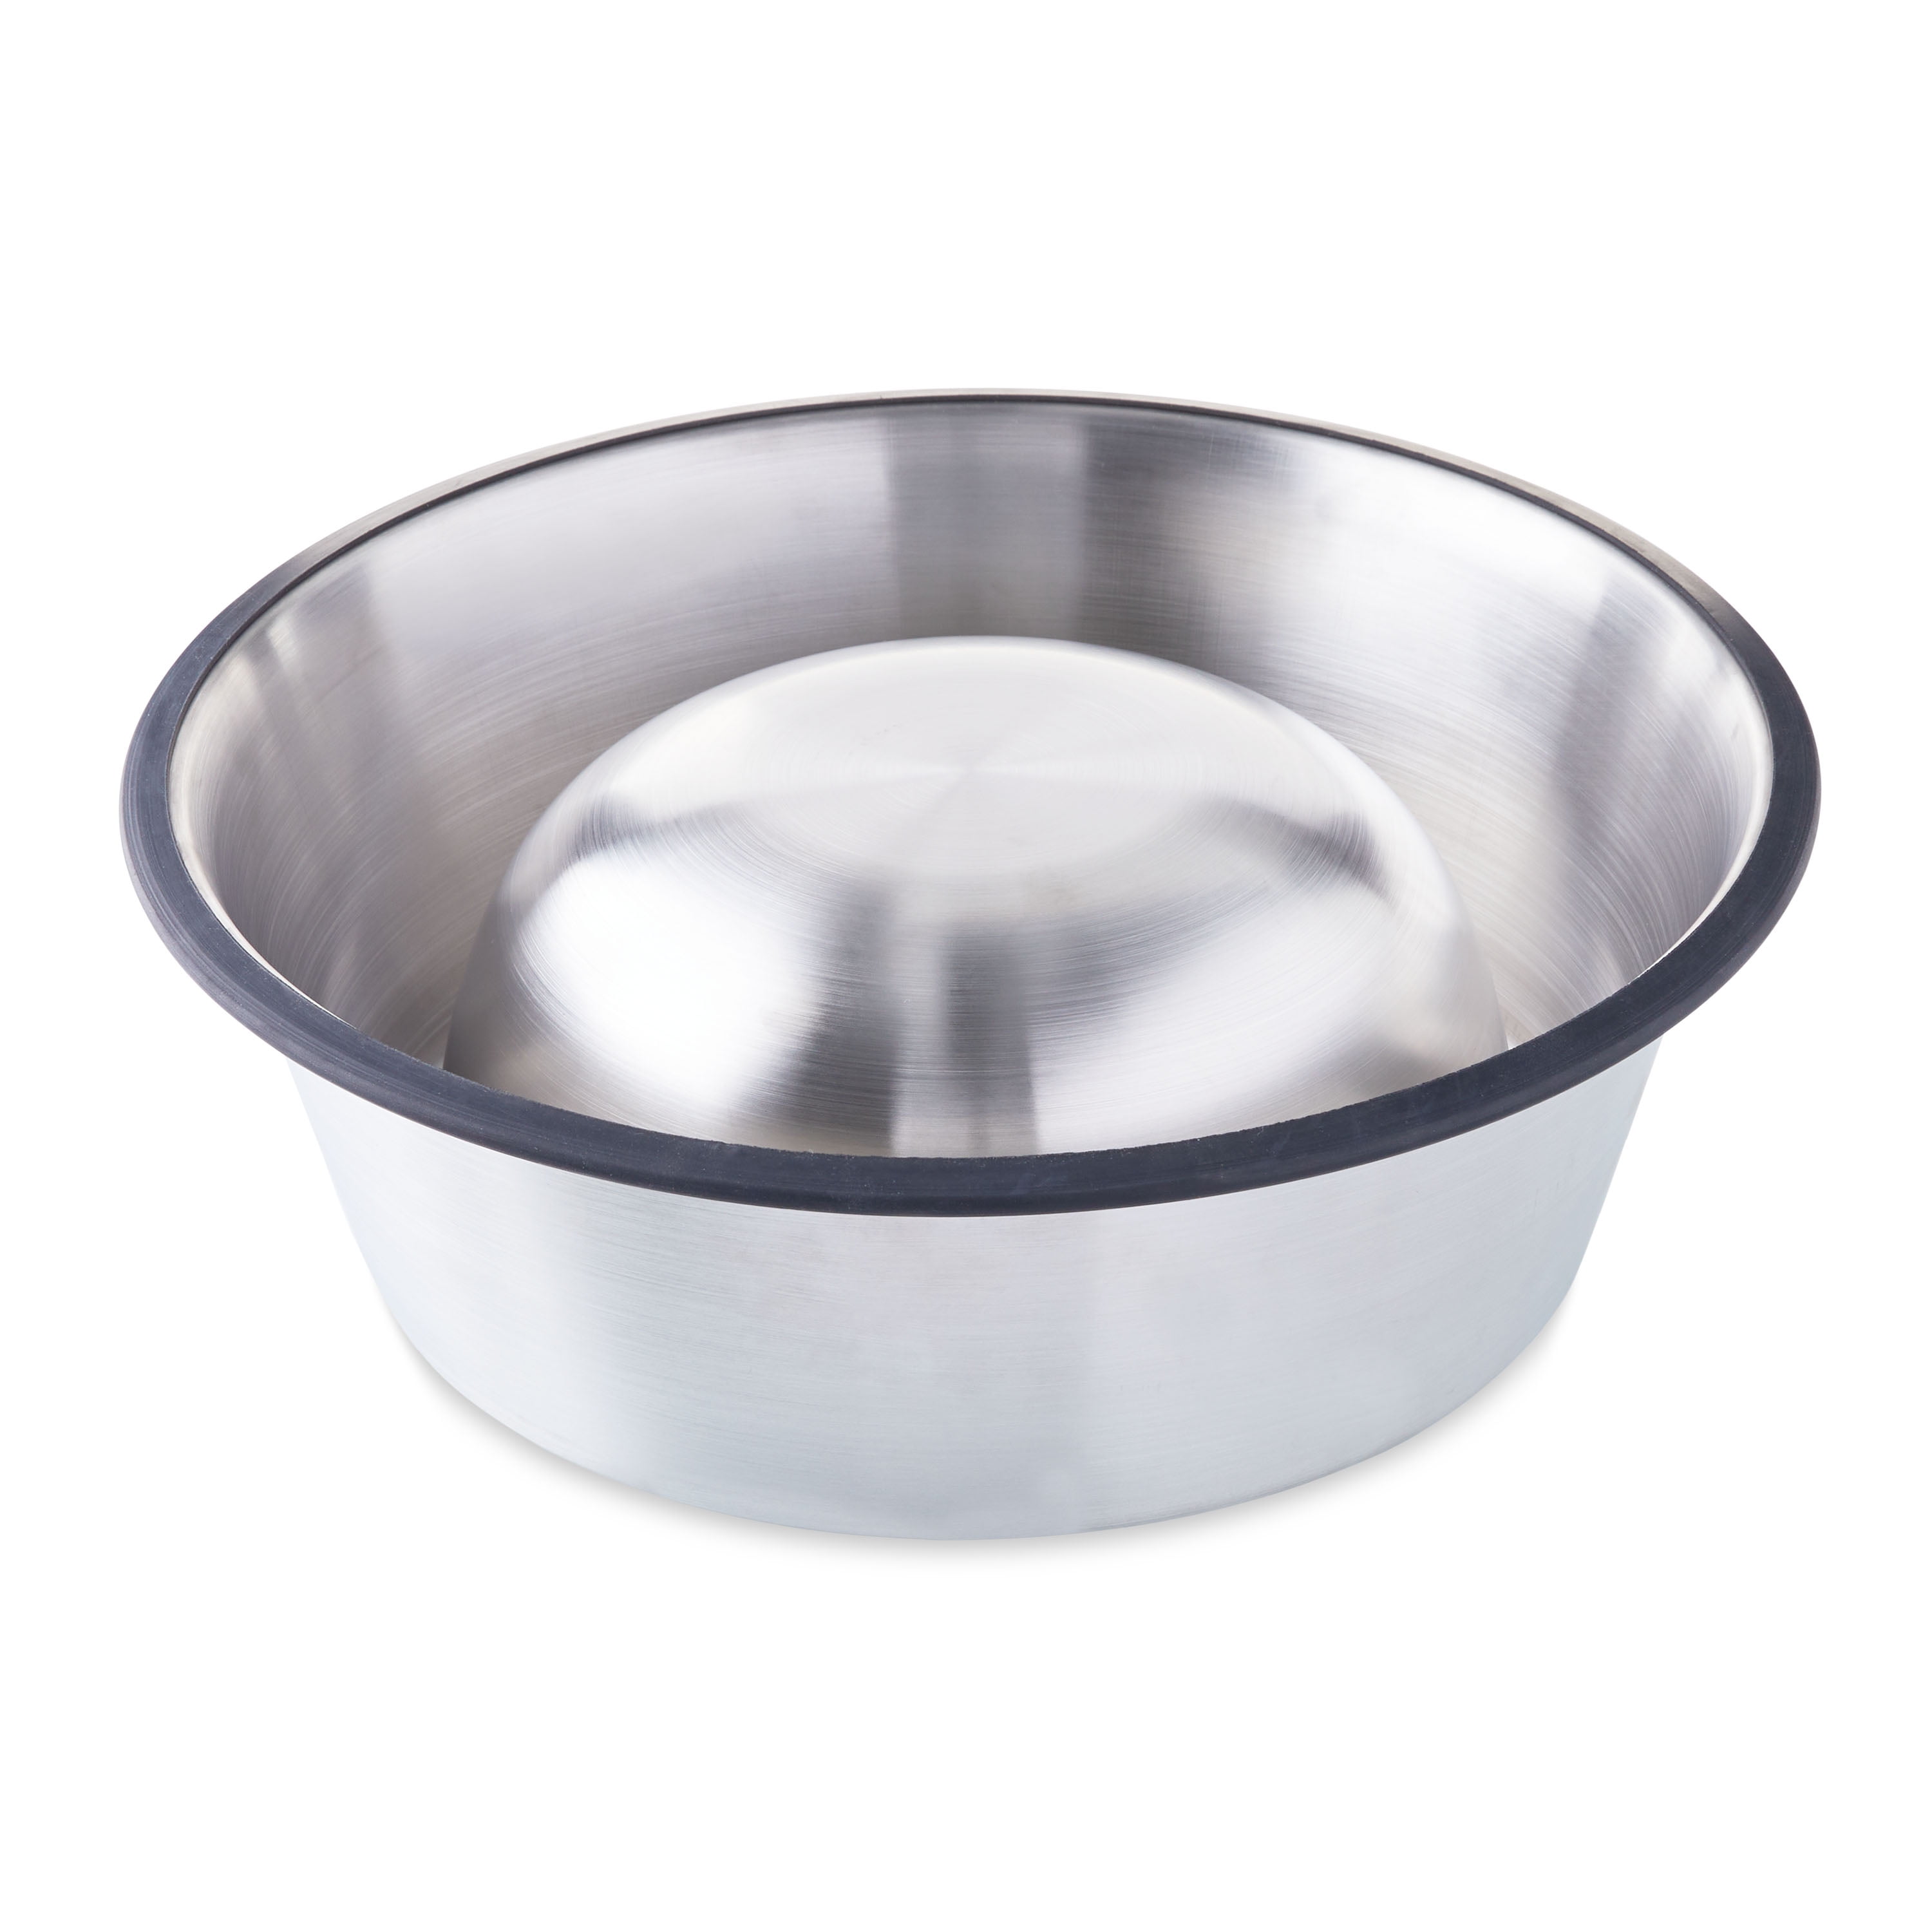 Vibrant Life Stainless Steel Double Wall Dog Bowl, Black, Large